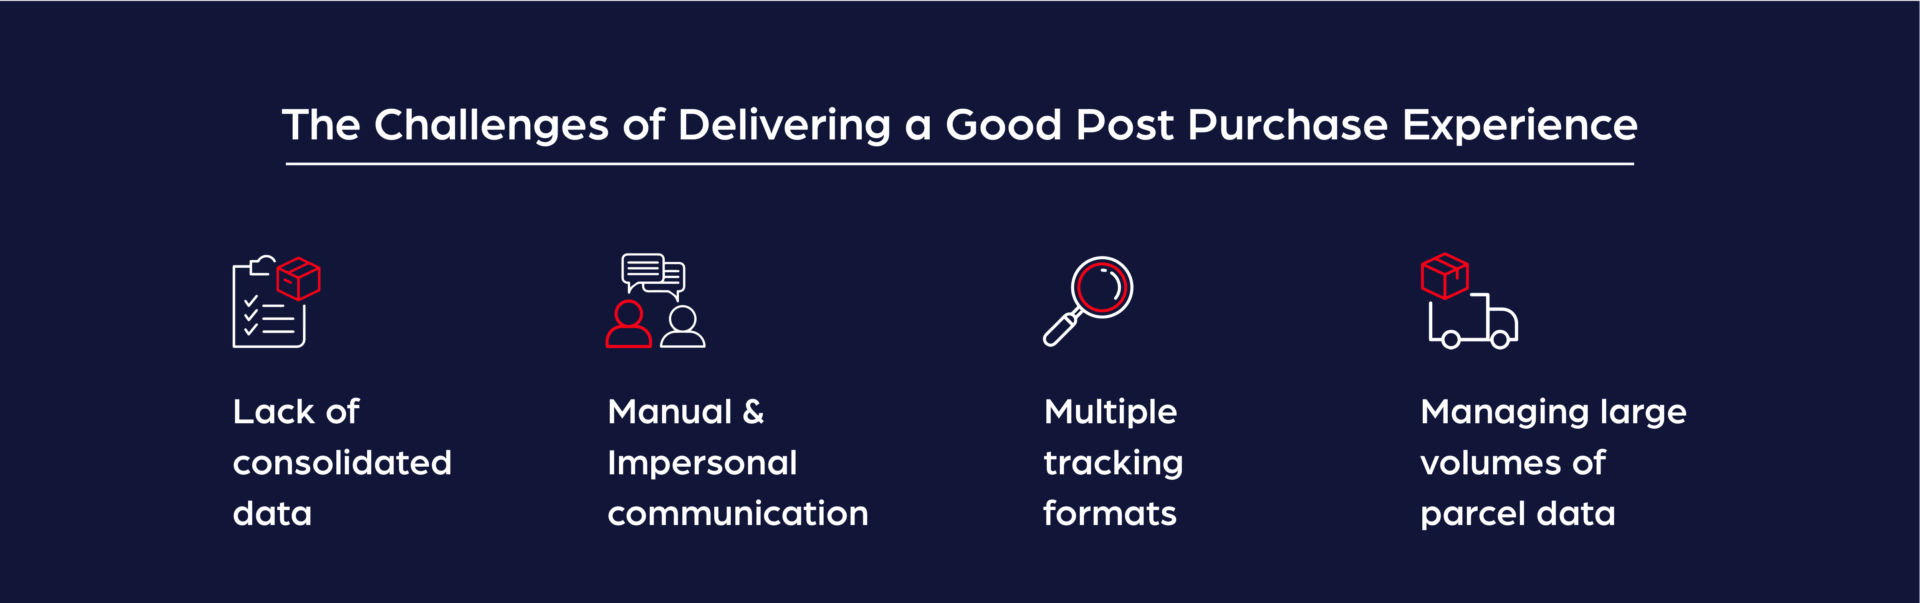 Challenges of Delivering a Good Post-Purchase Experience